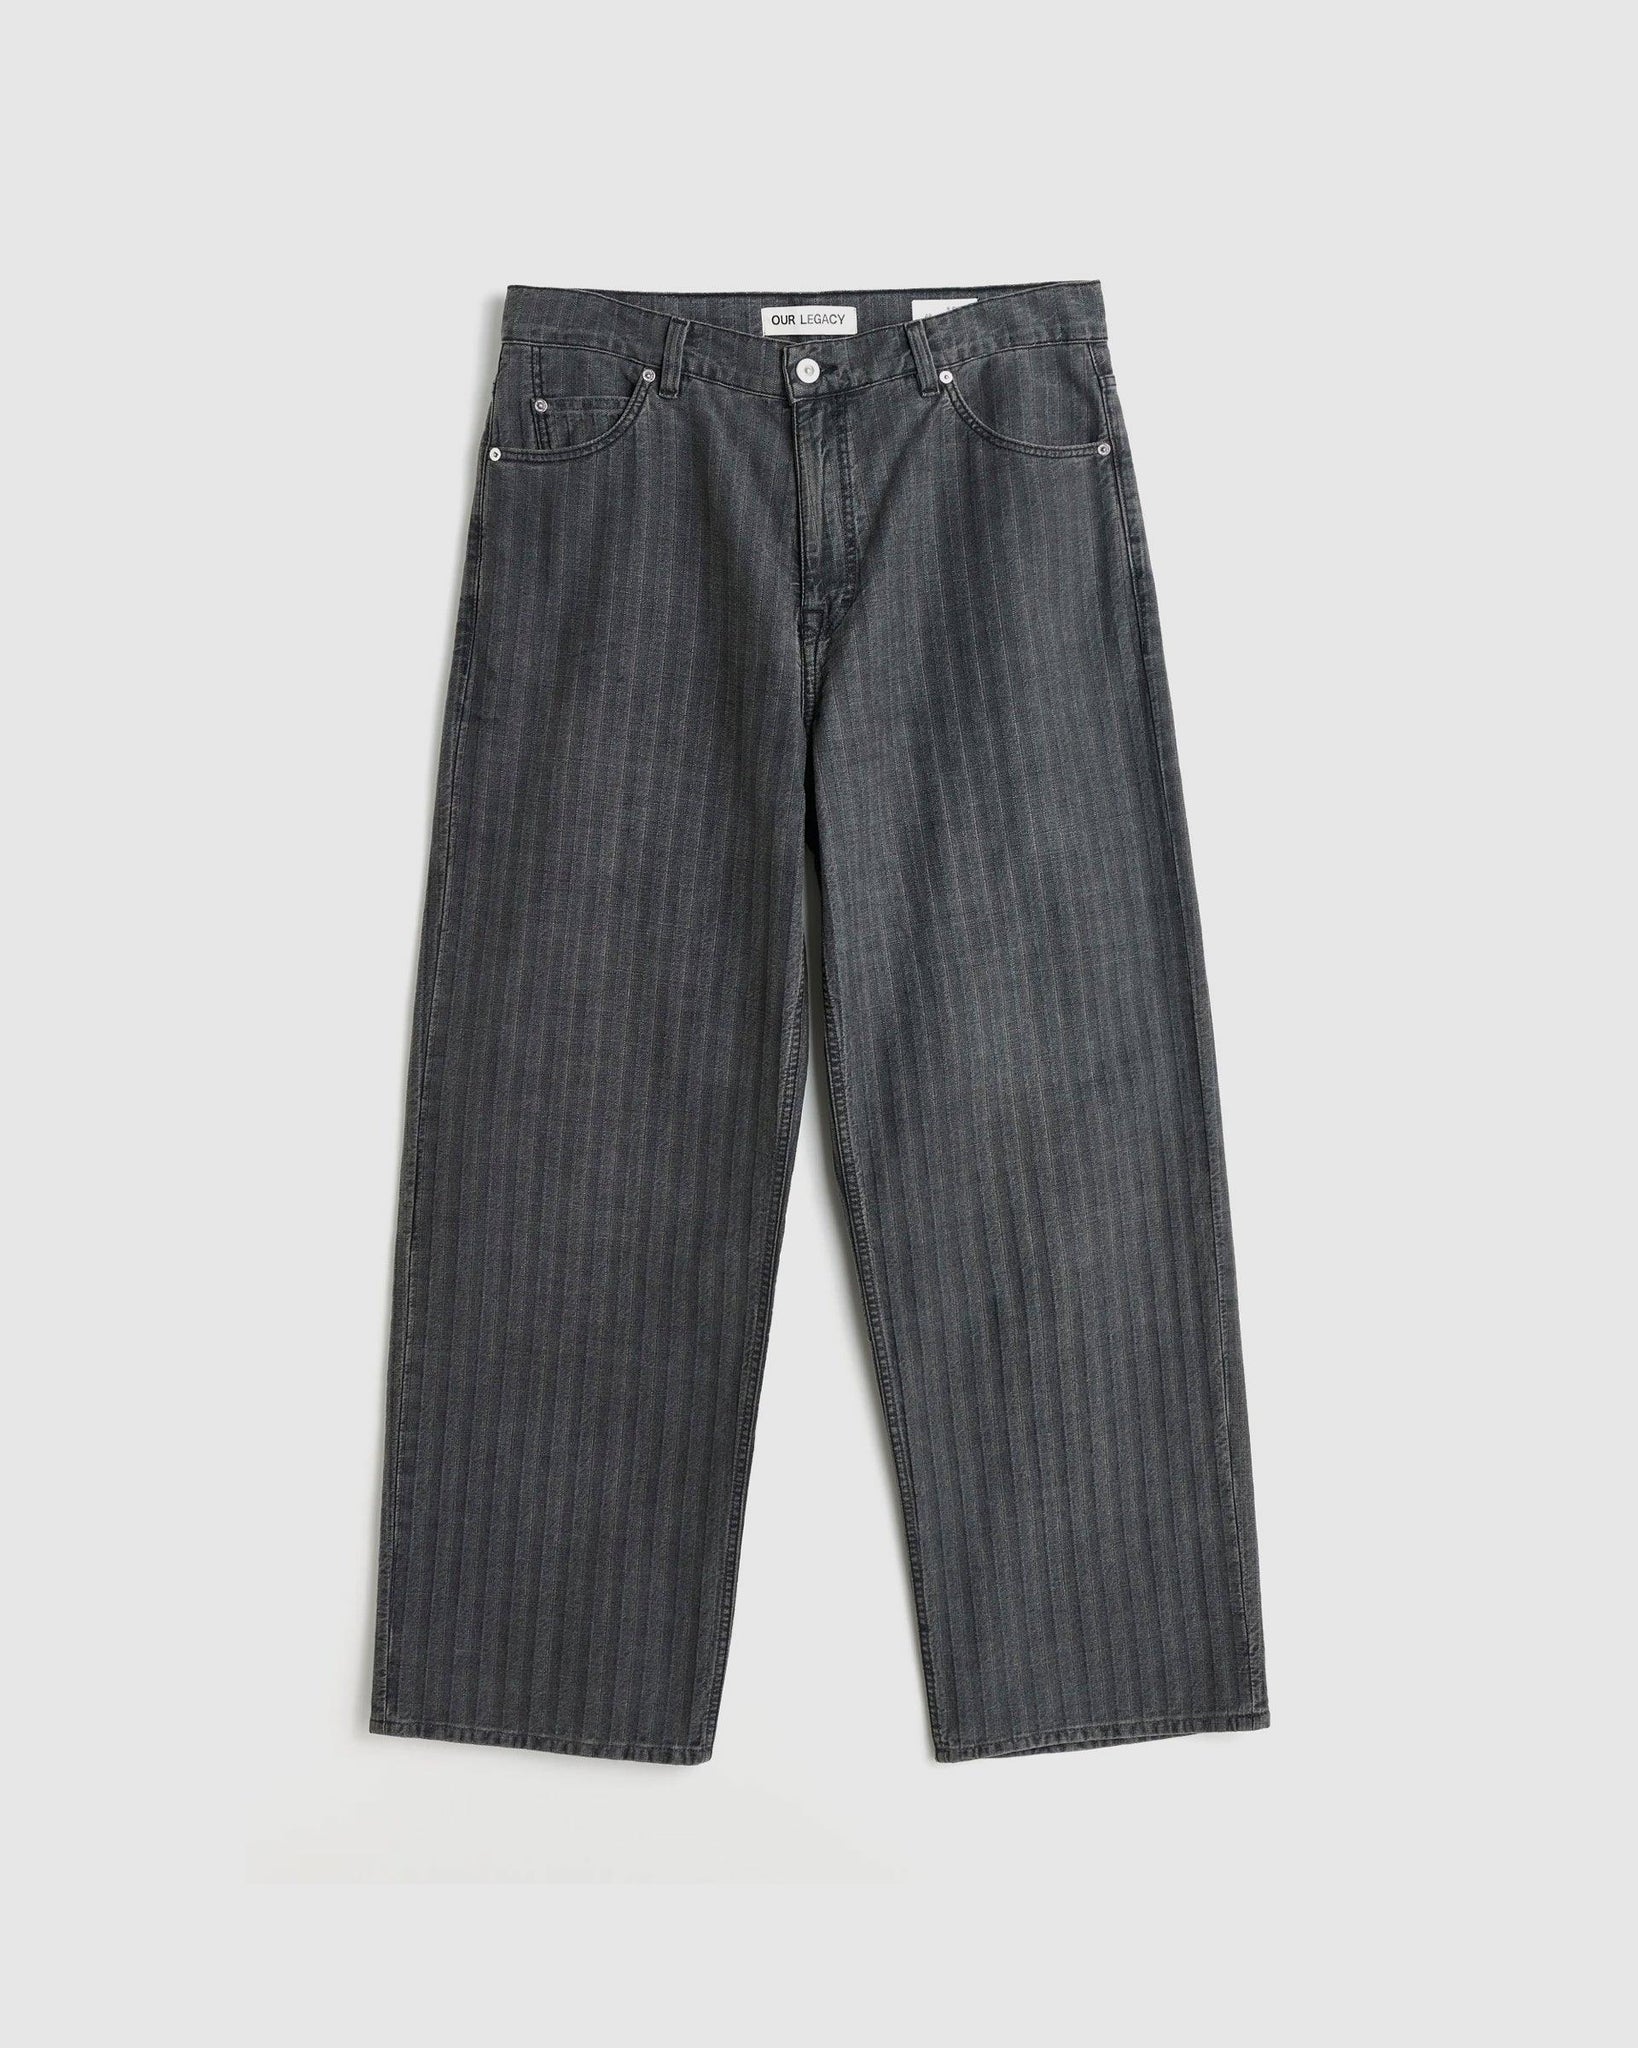 Vast Cut Washed Grey Torino Grey Denim Jeans - {{ collection.title }} - Chinatown Country Club 